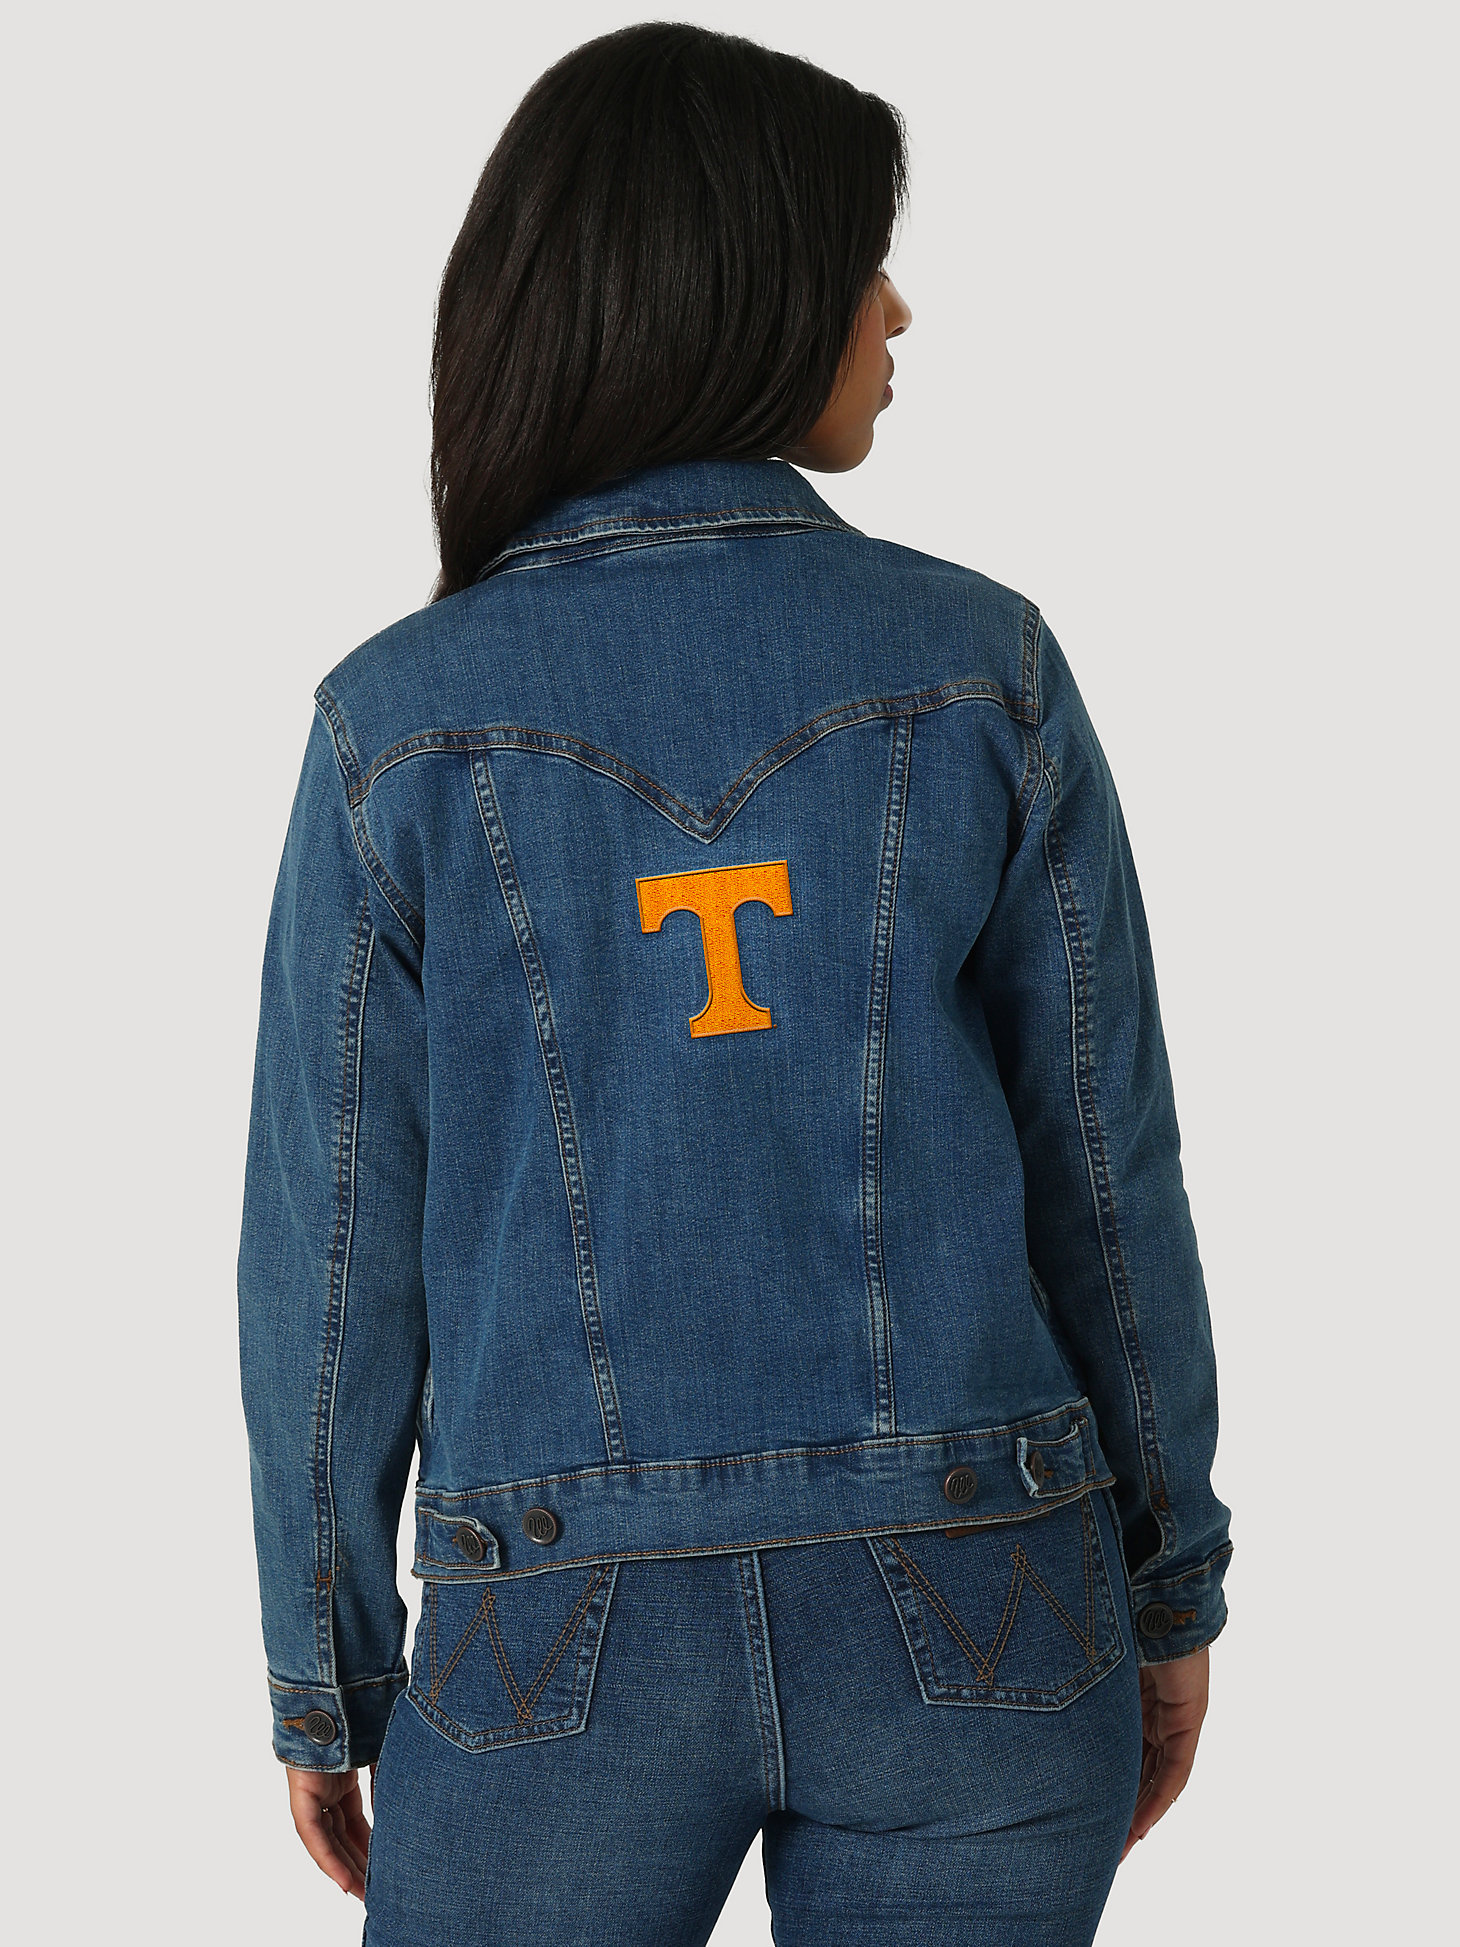 Women's Wrangler Collegiate Embroidered Classic Fit Denim Jacket in University of Tennessee alternative view 1